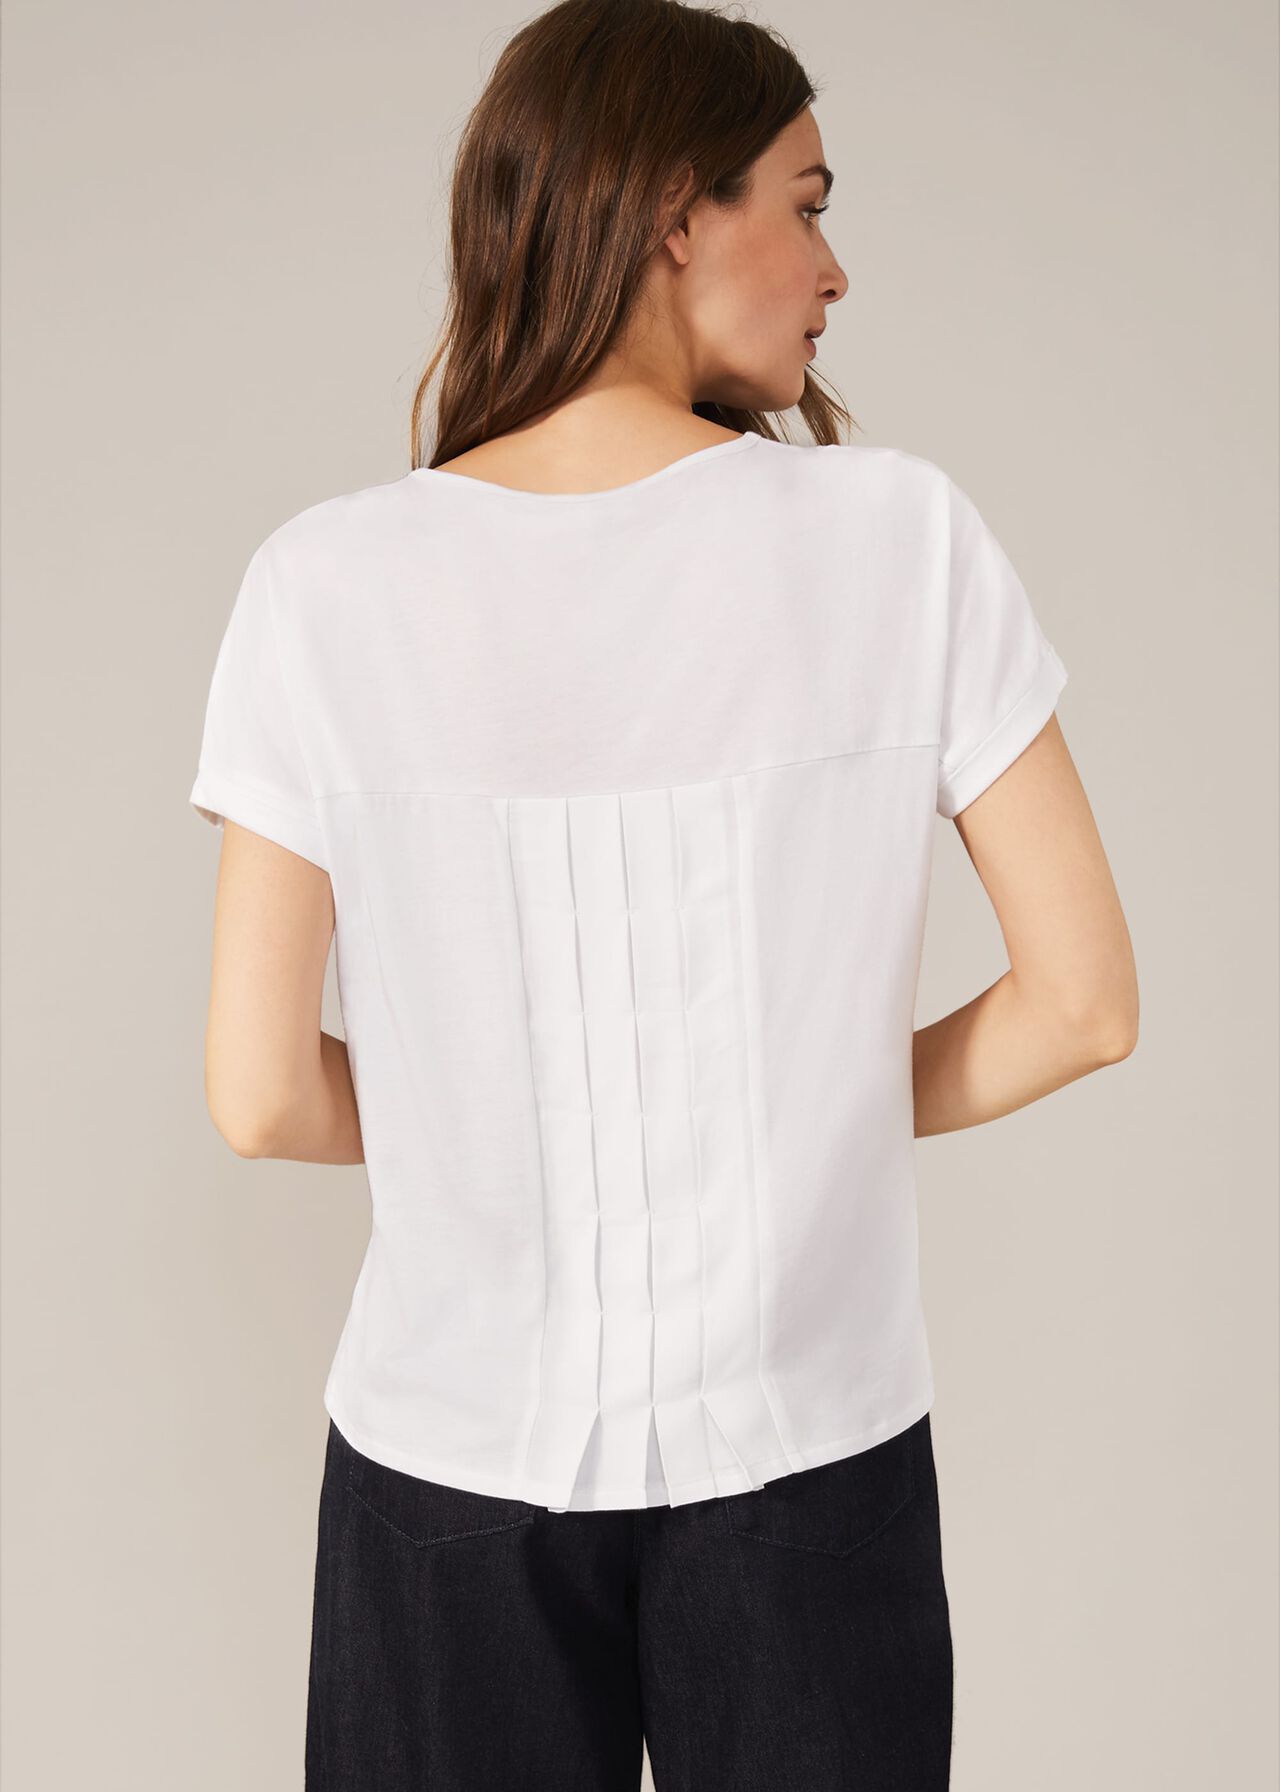 Iona Pleat Front Top